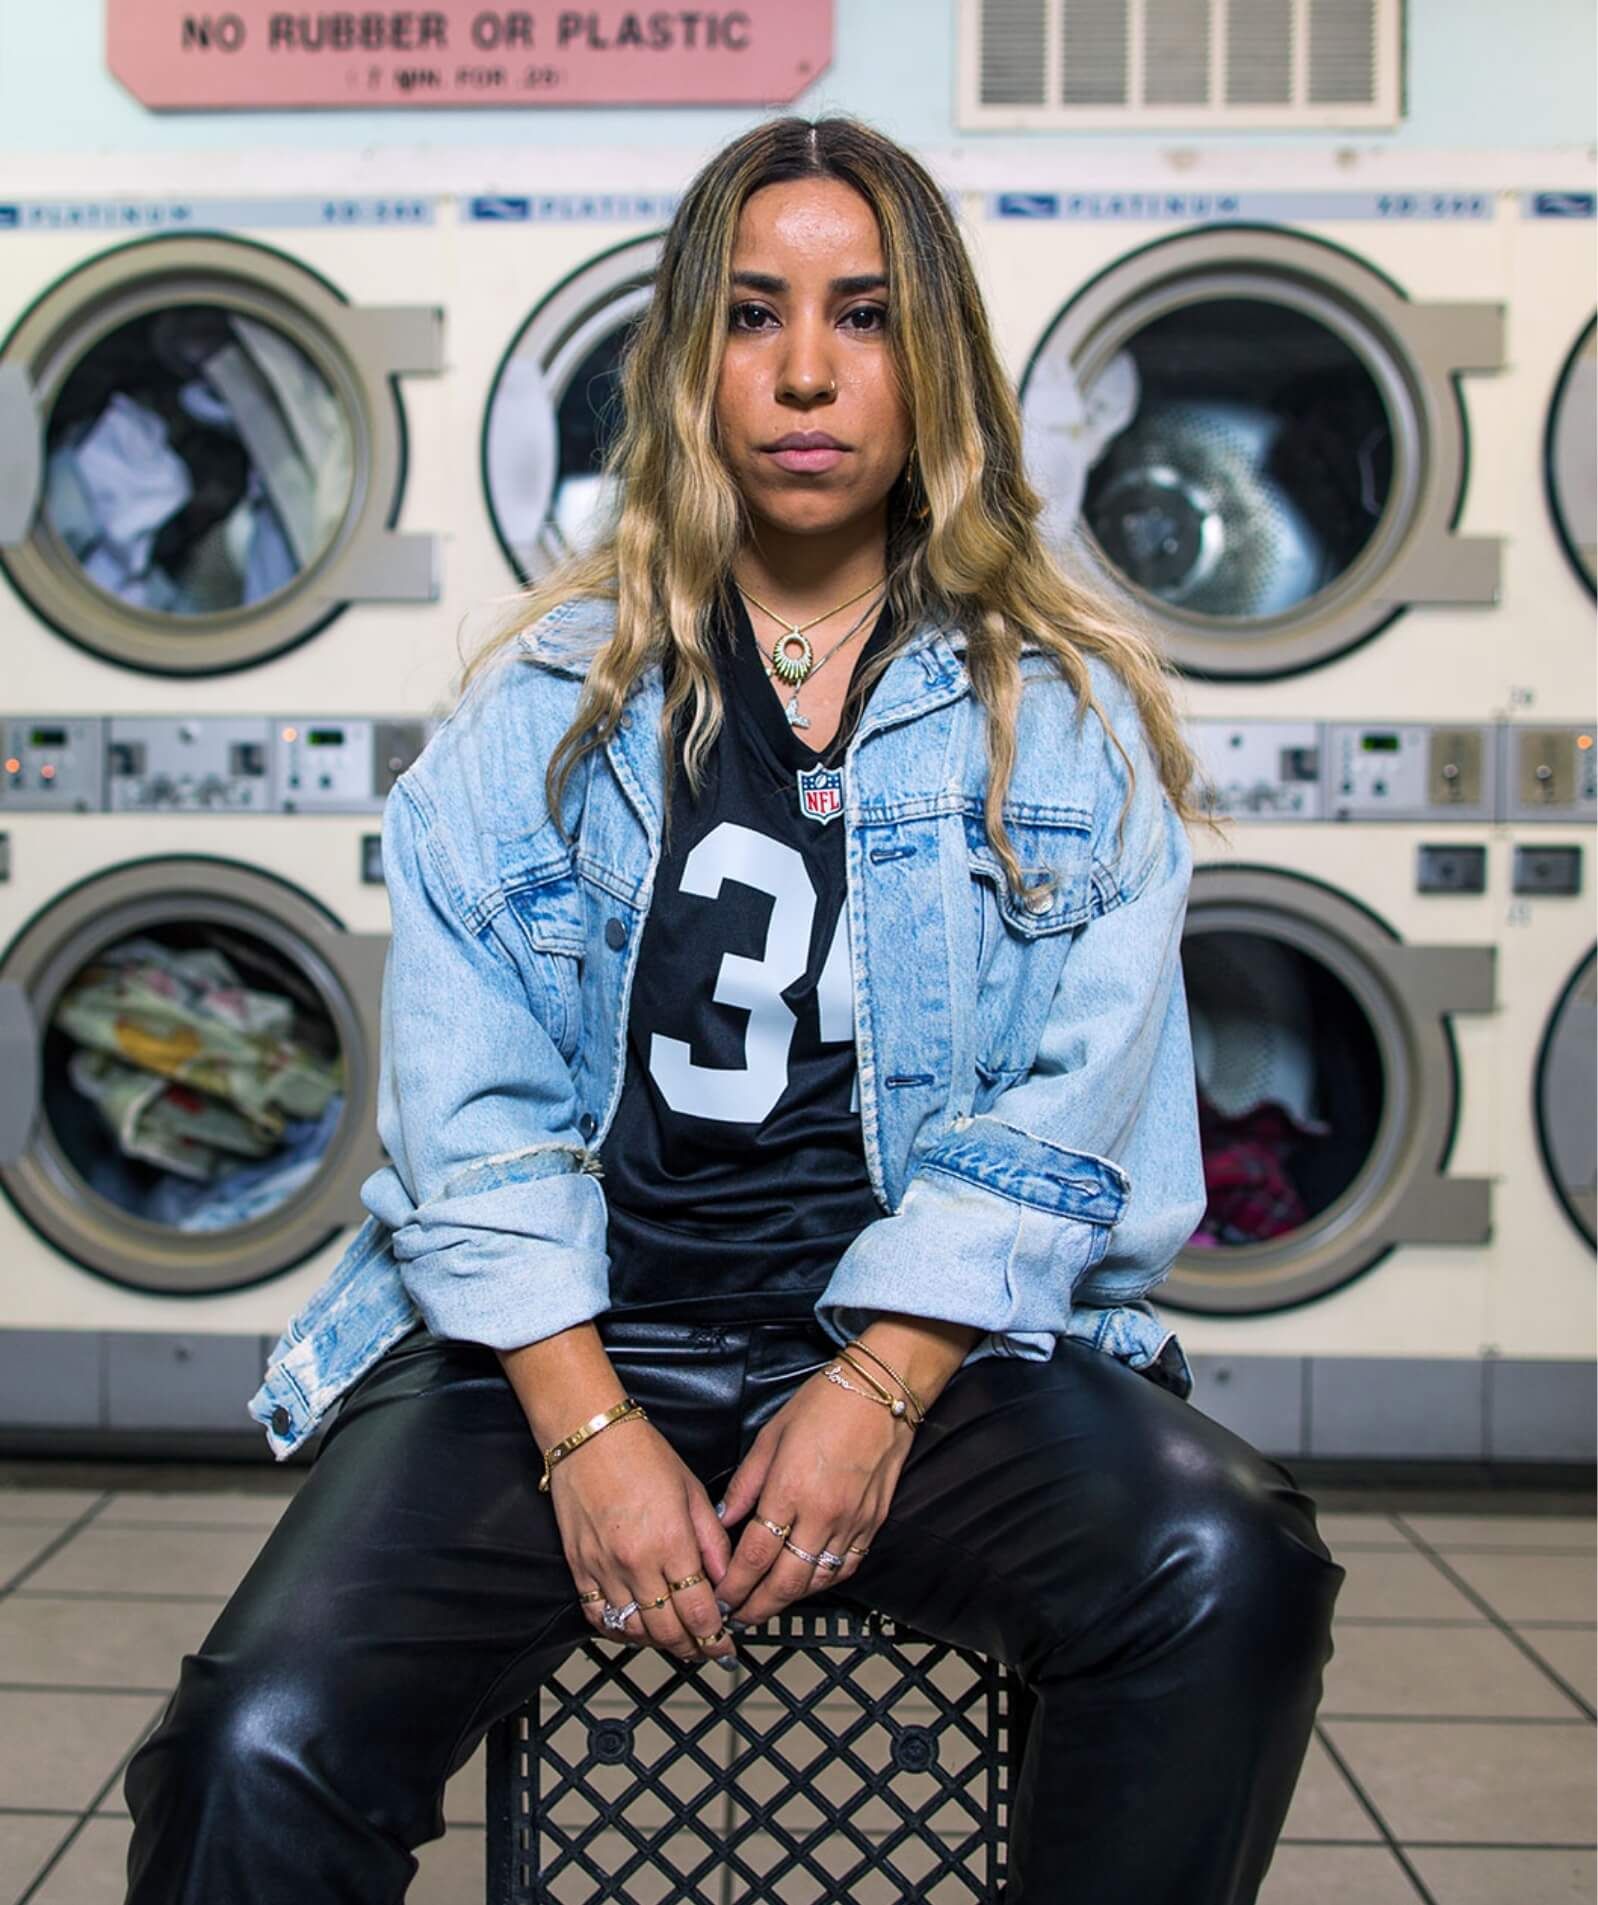 Woman wearing denim jacket and number 34 Raiders jersey in laundromat sitting on crate